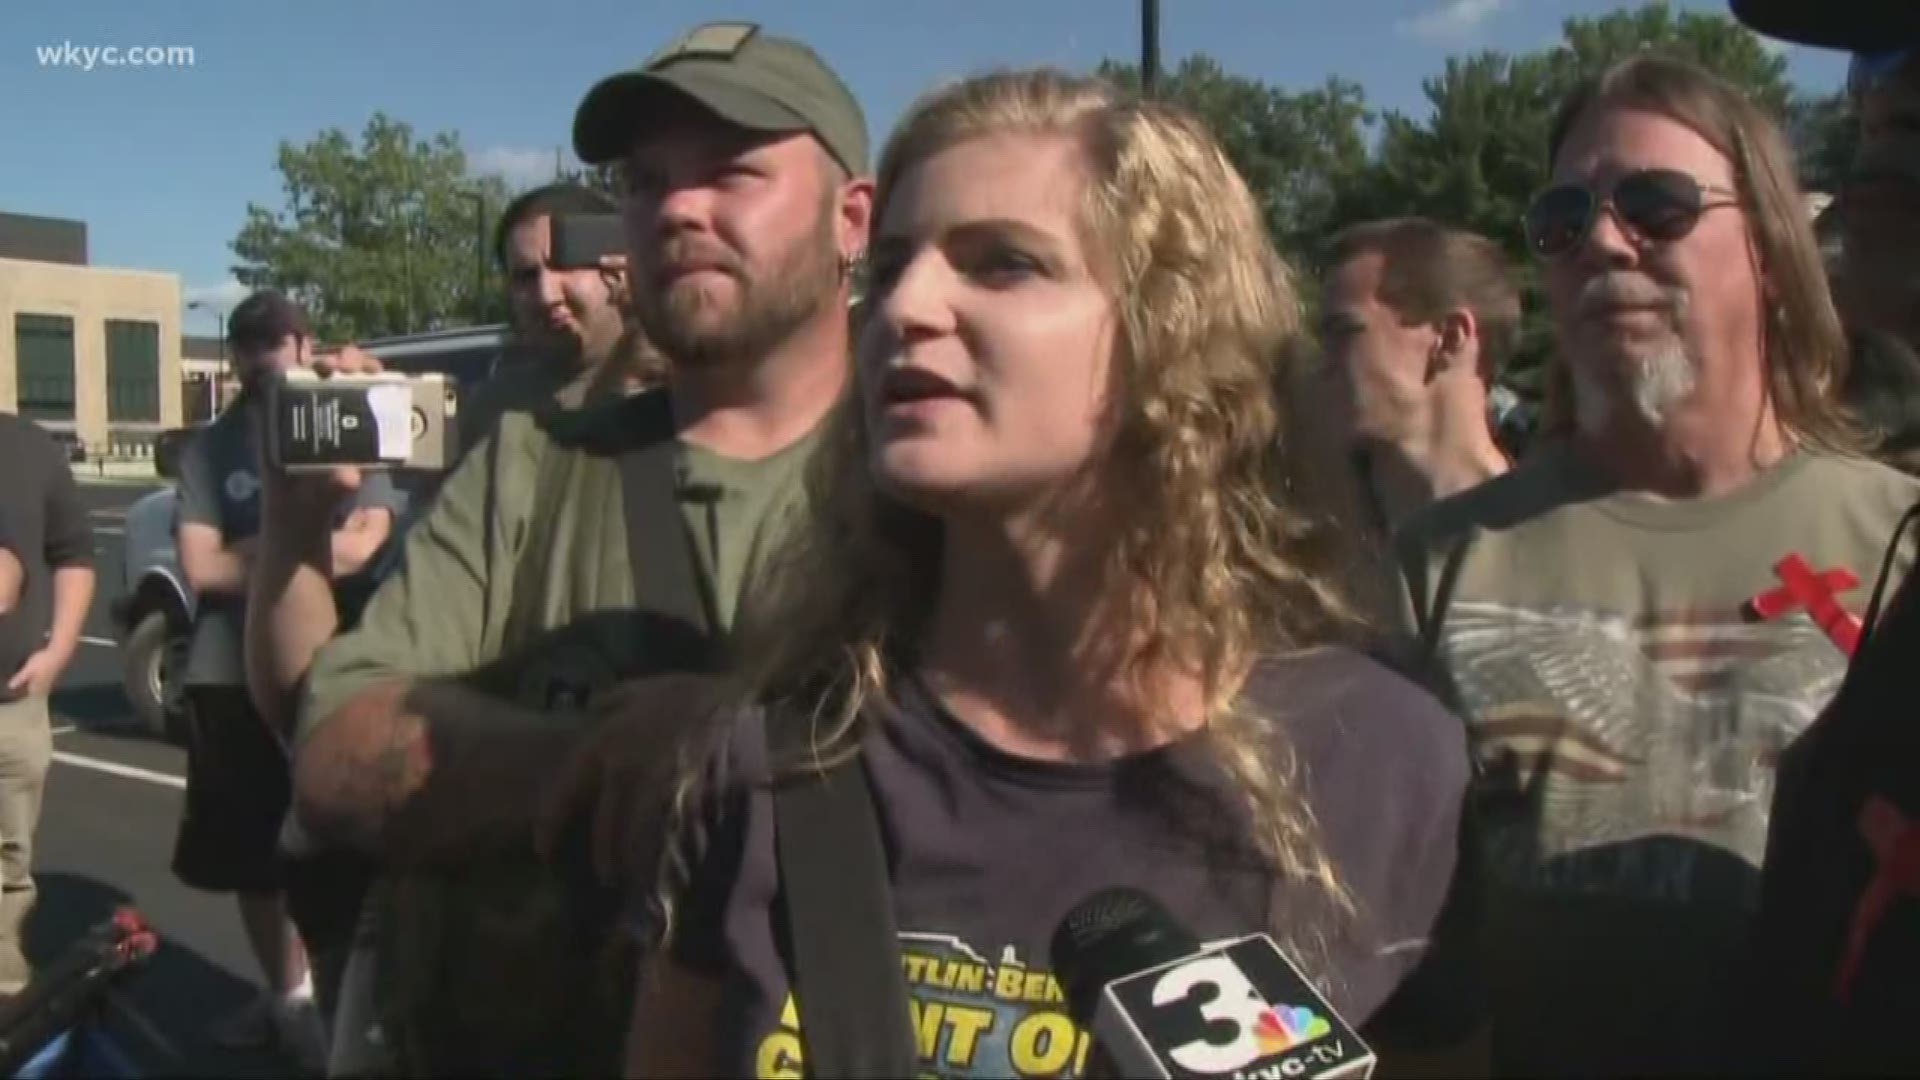 Opposing sides clash at Kent State University open carry walk hosted by former student